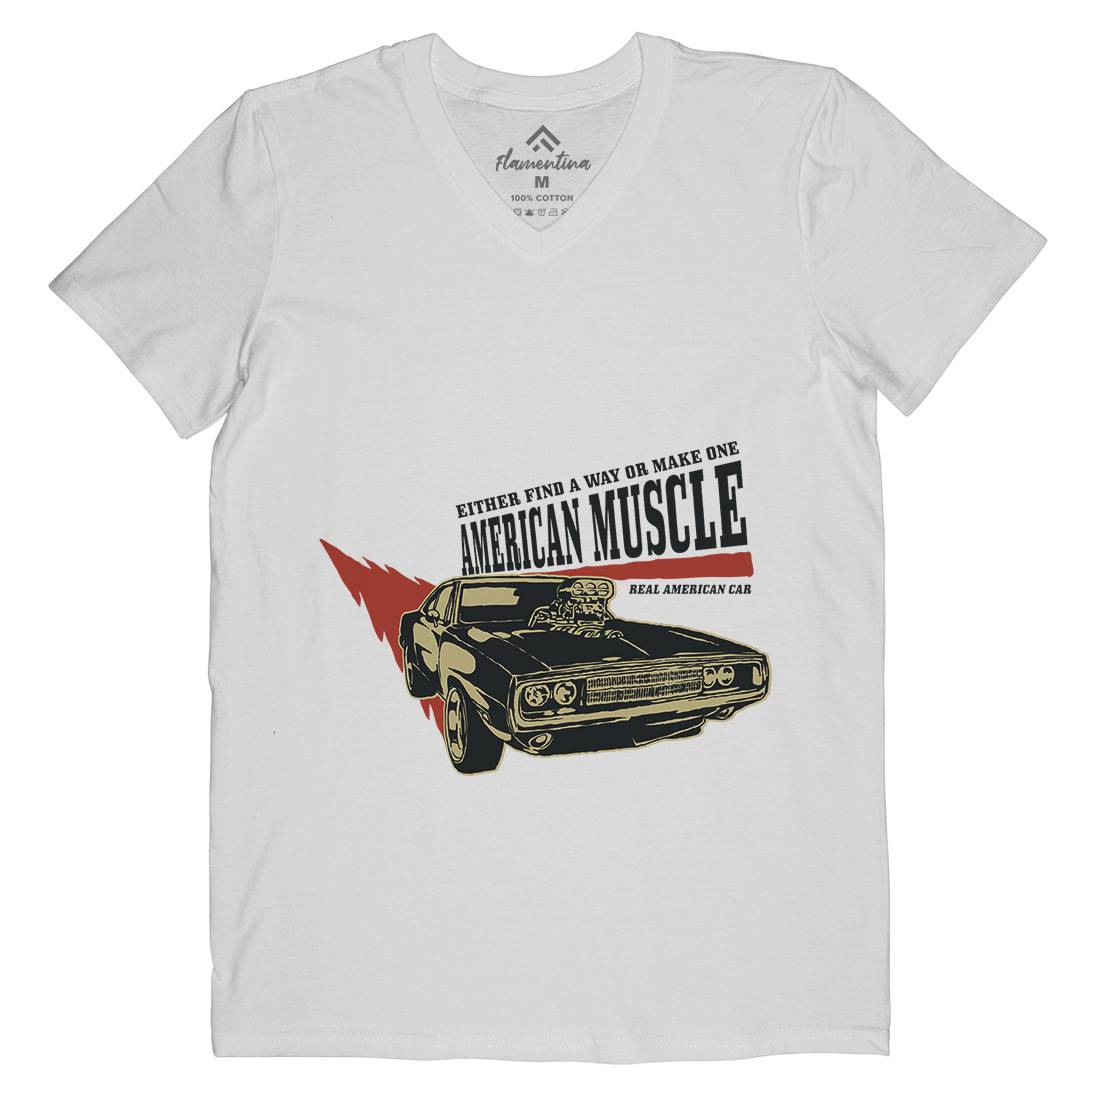 American Muscle Mens V-Neck T-Shirt Cars A402